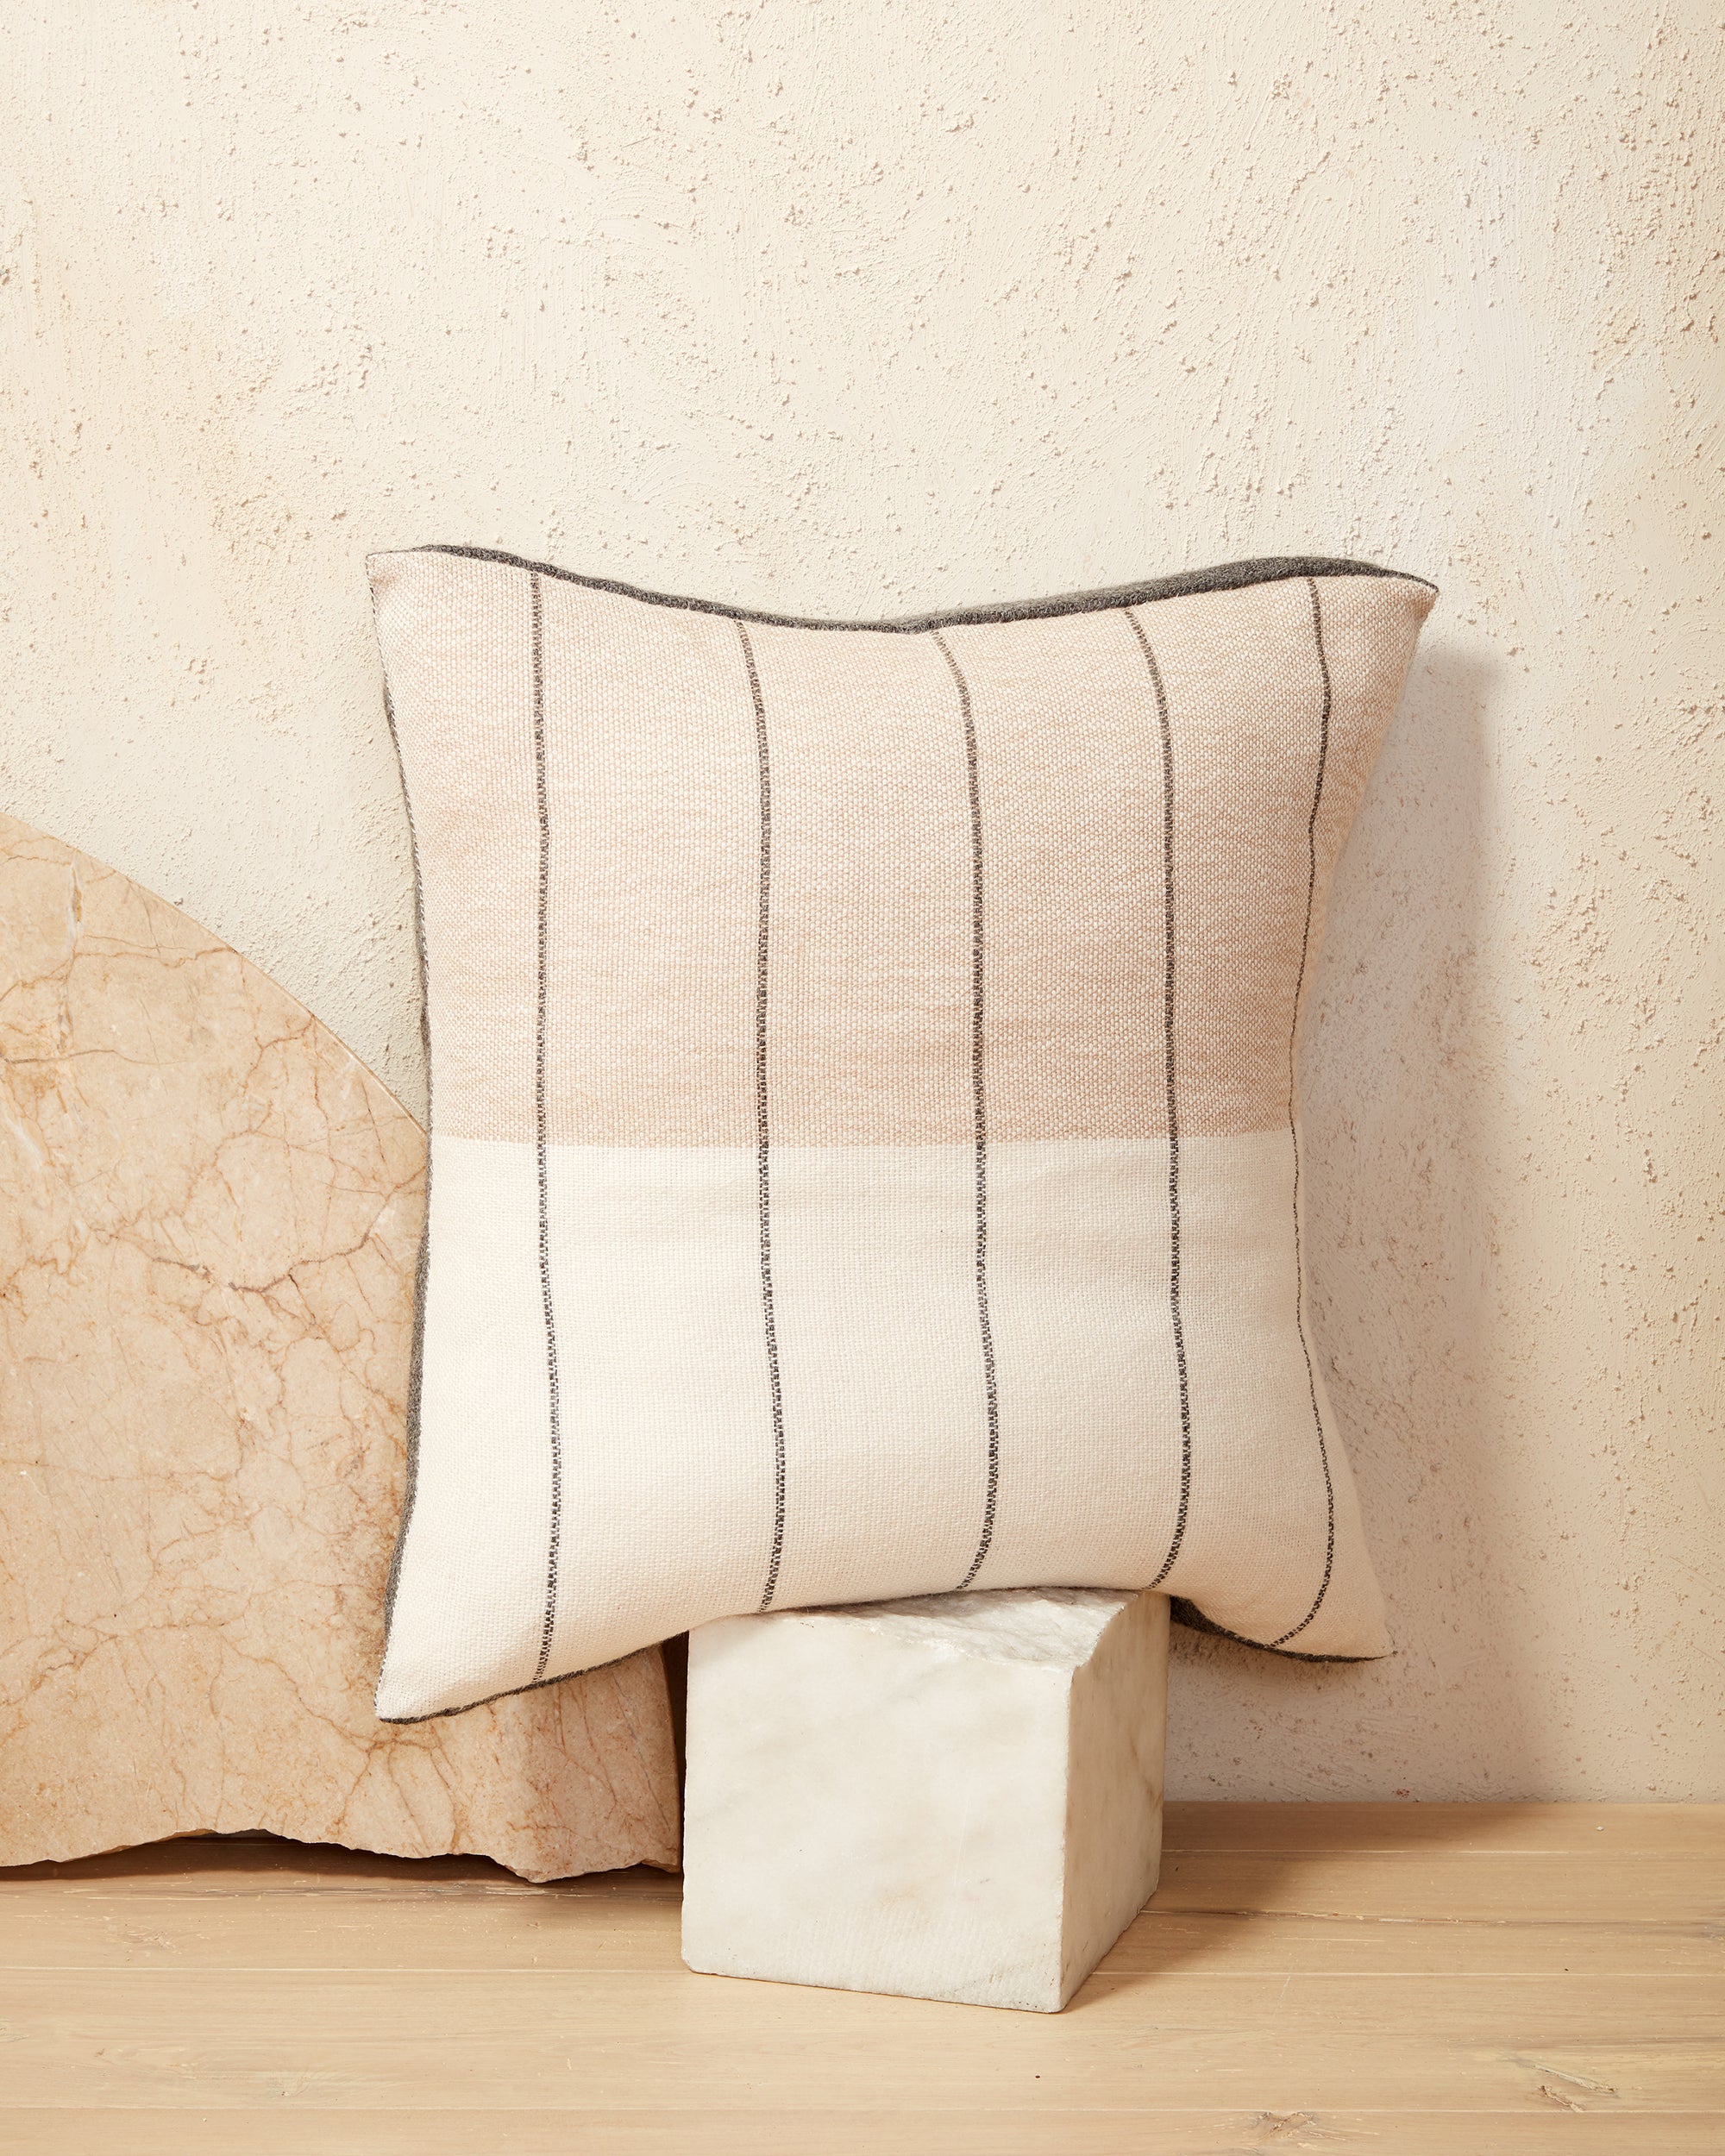 ethically handwoven pillow, alpaca. cream and beige, inspired by Anni Albers